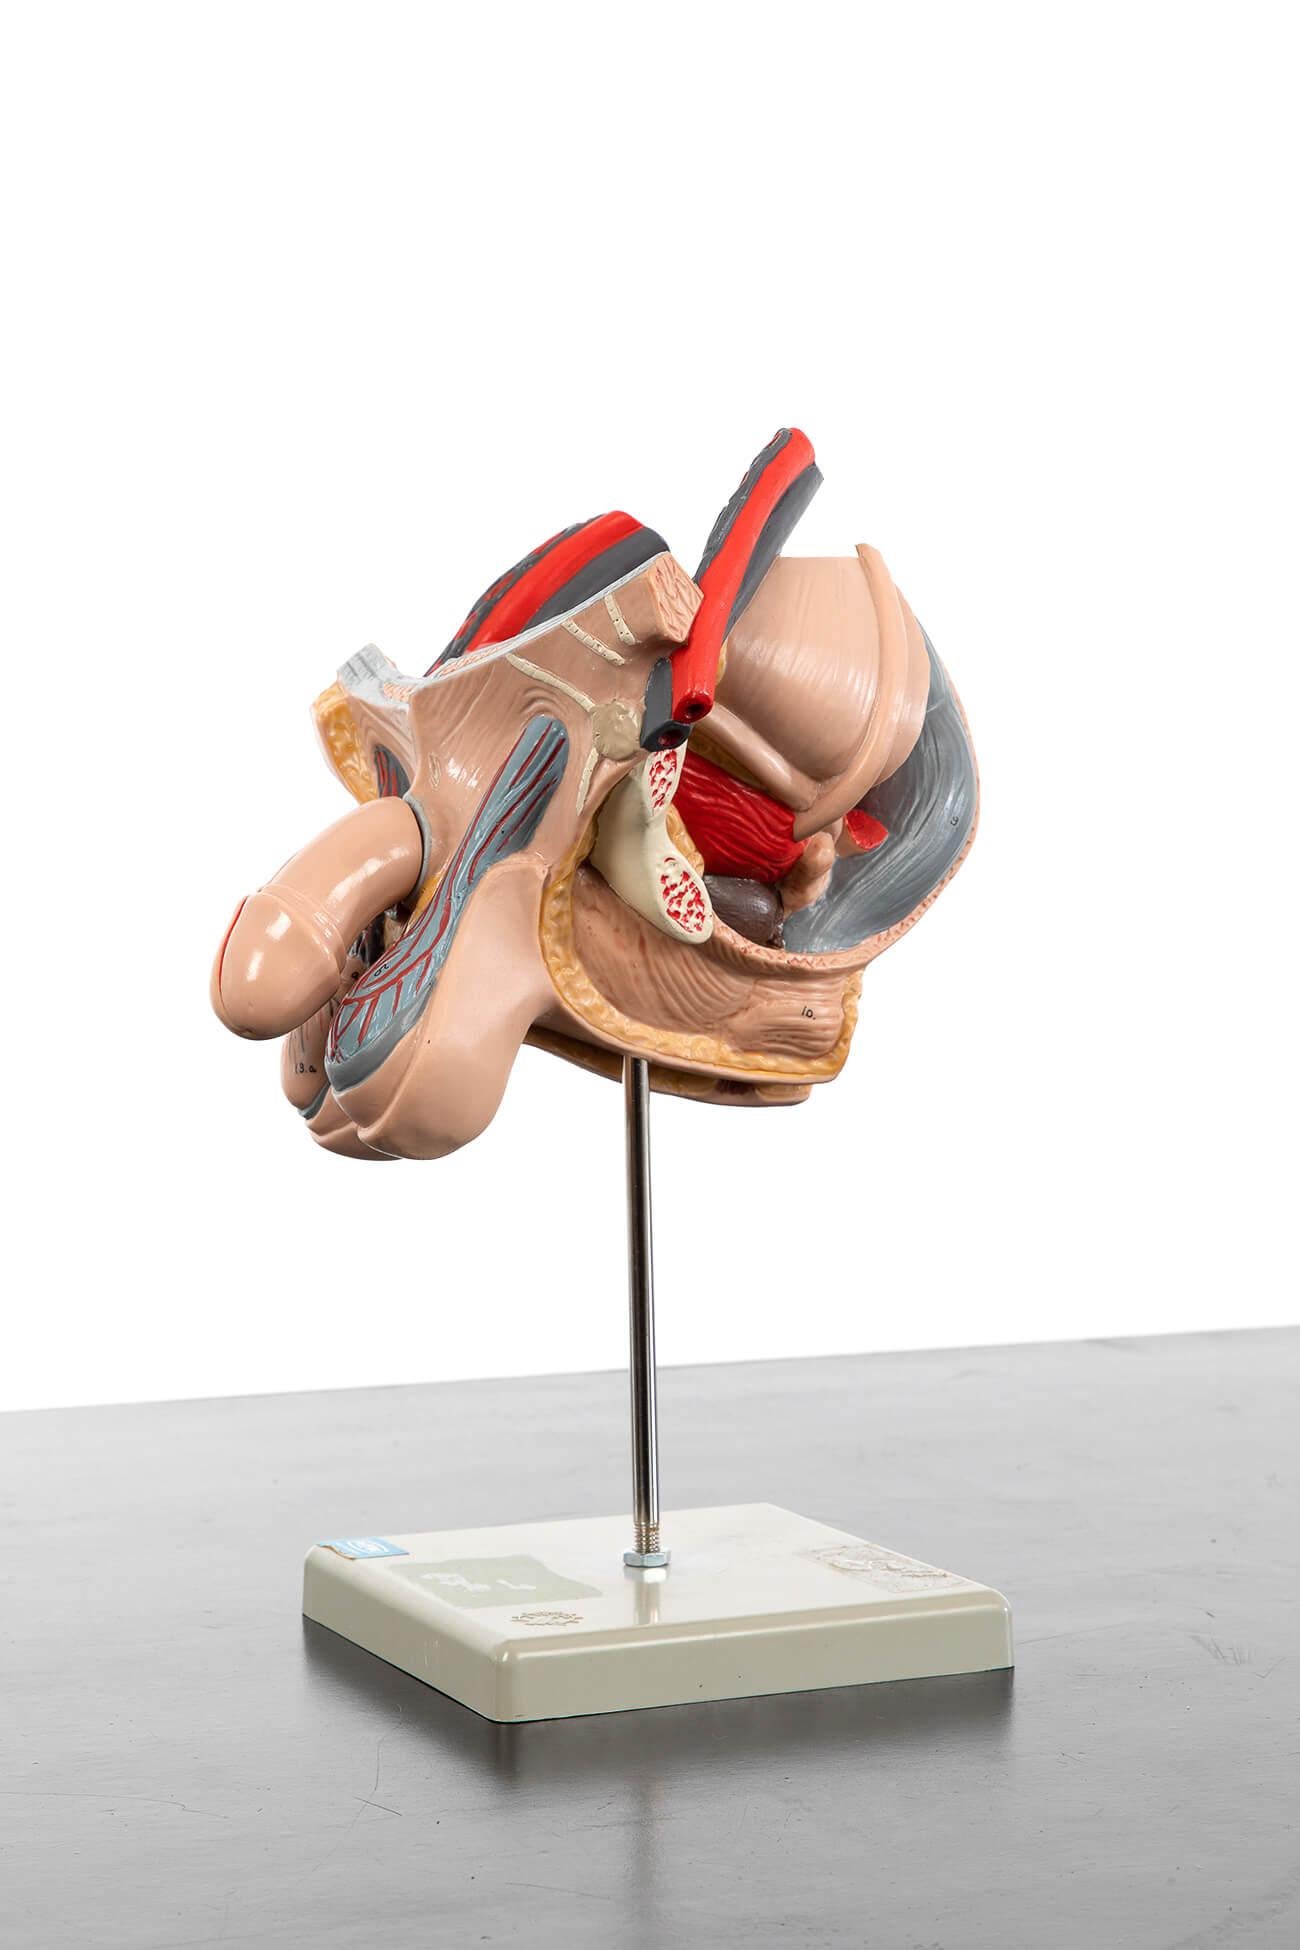 An internal and external model of the small pelvis of the male genitalia.

Made by Somso in Somsoplast with a hand-painted finish.

The model has excellent detailing and can be split along a cross-section revealing the internal sections. All are